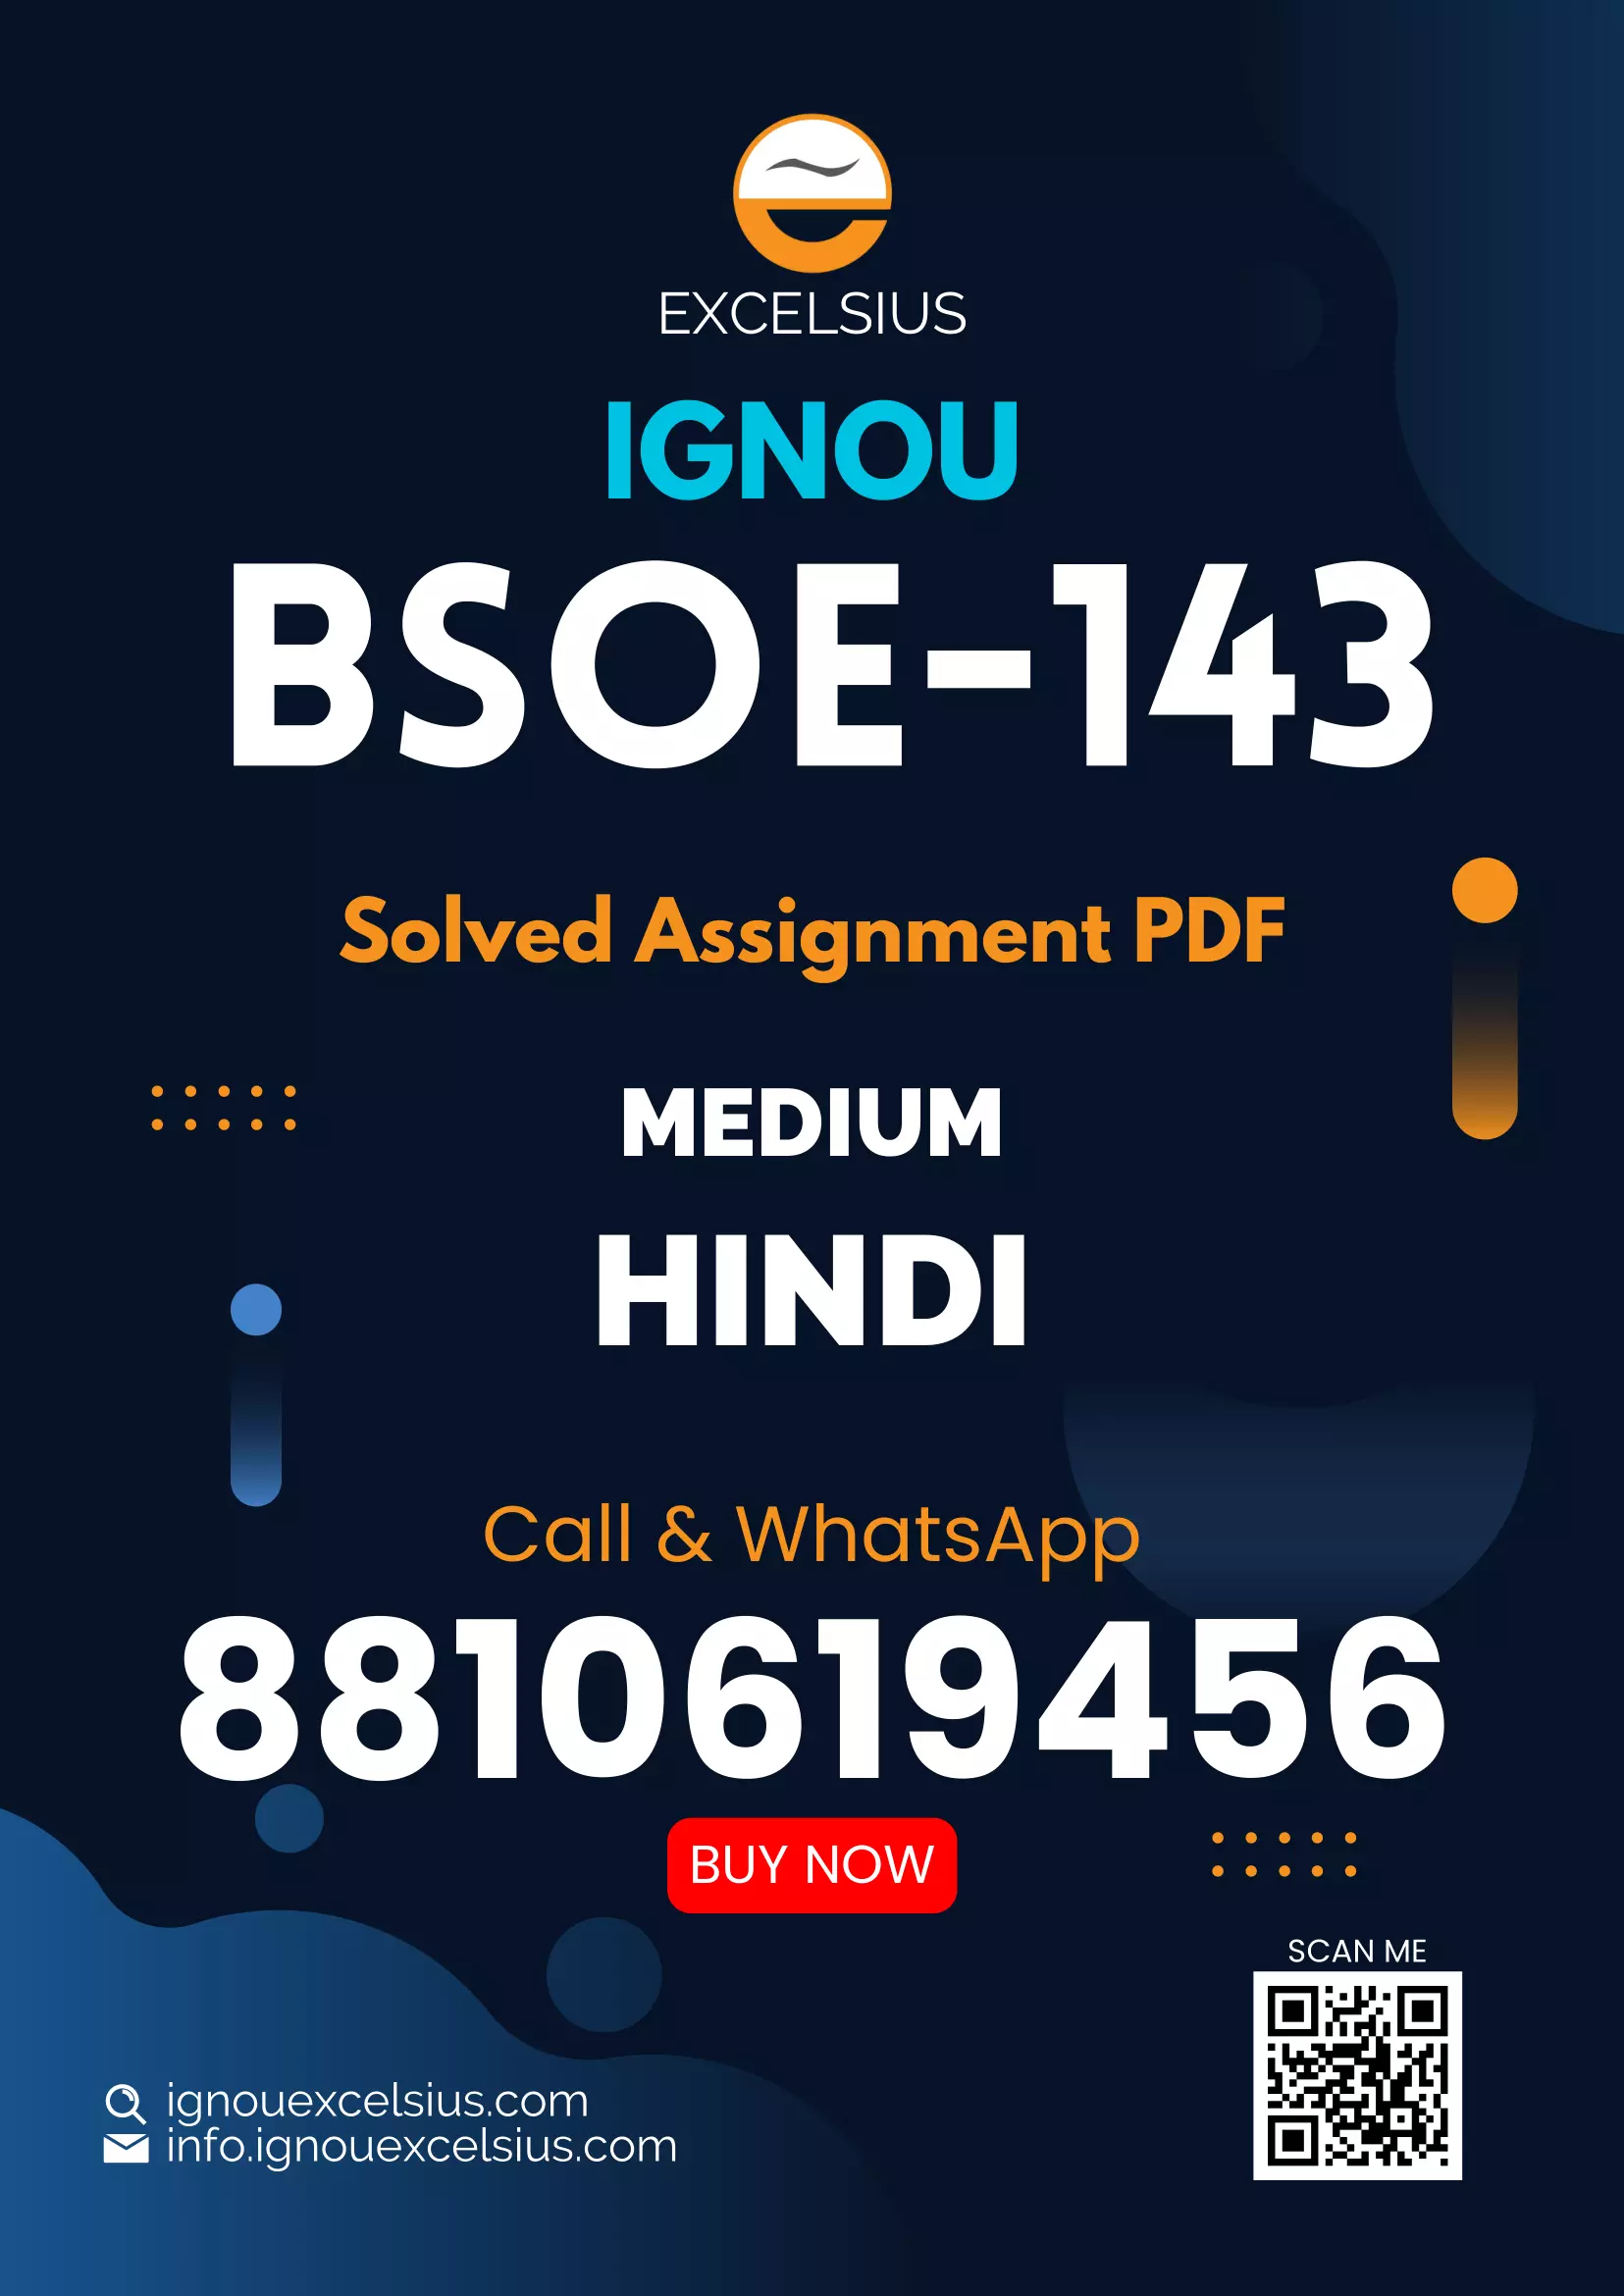 IGNOU BSOE-143 - Environmental Sociology, Latest Solved Assignment-July 2022 – January 2023